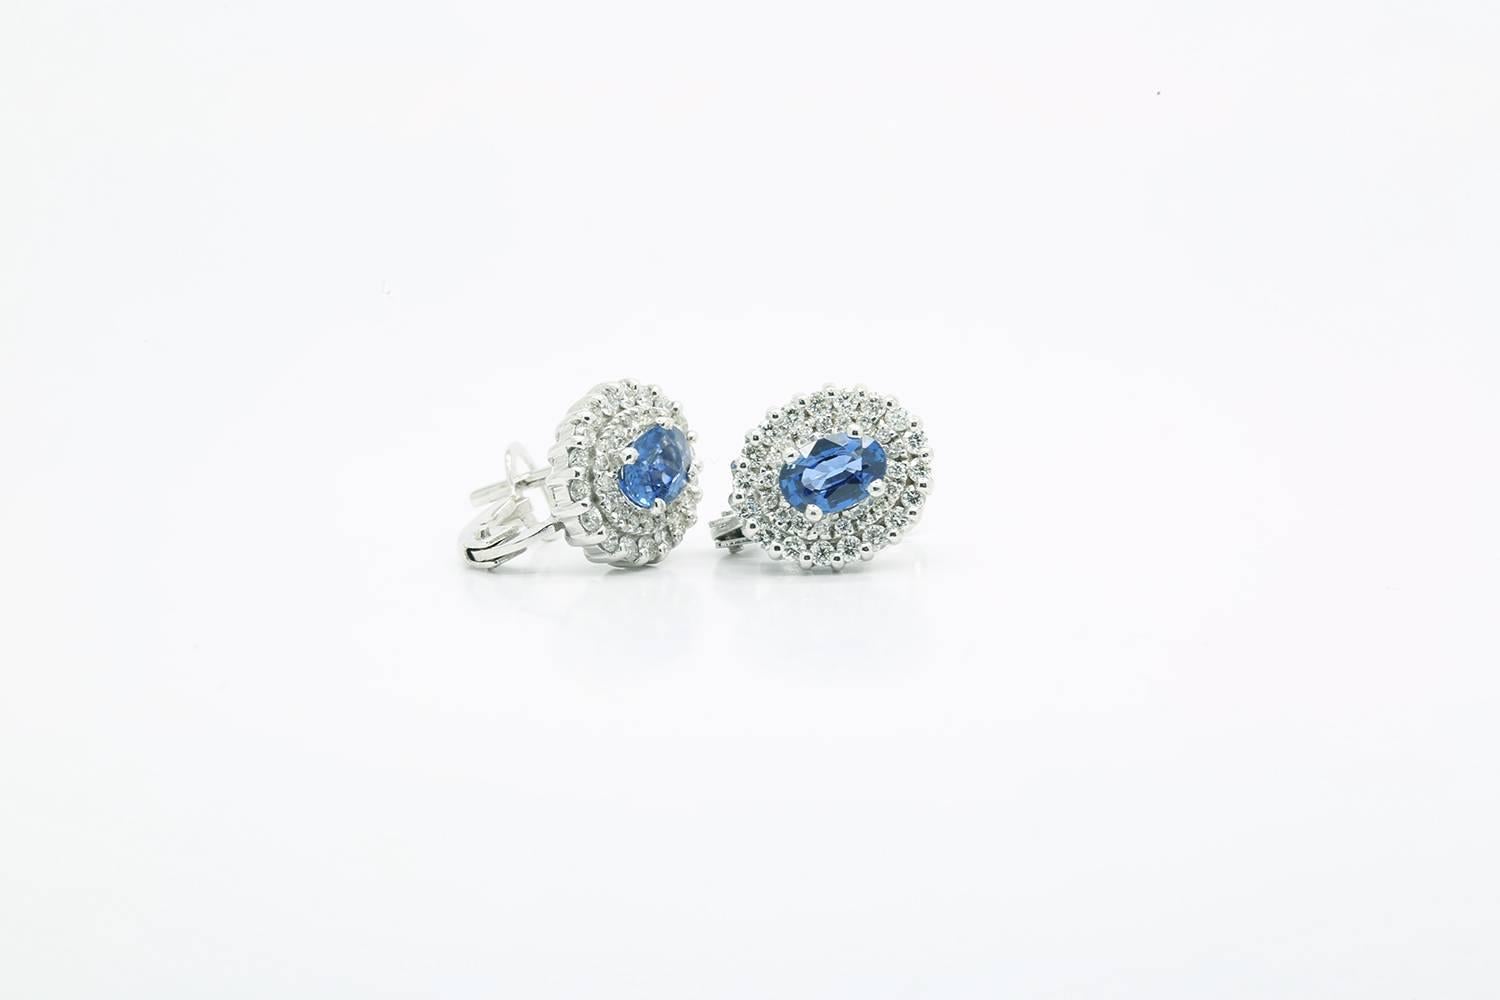 Blue Sapphires Diamond earrings in 18k white gold by FERRUCCI with bright white diamonds, fine and elegant, Made in Italy

Diamonds total carat weight 0.46 ct

Blues Sapphires carat weight 1.10 ct